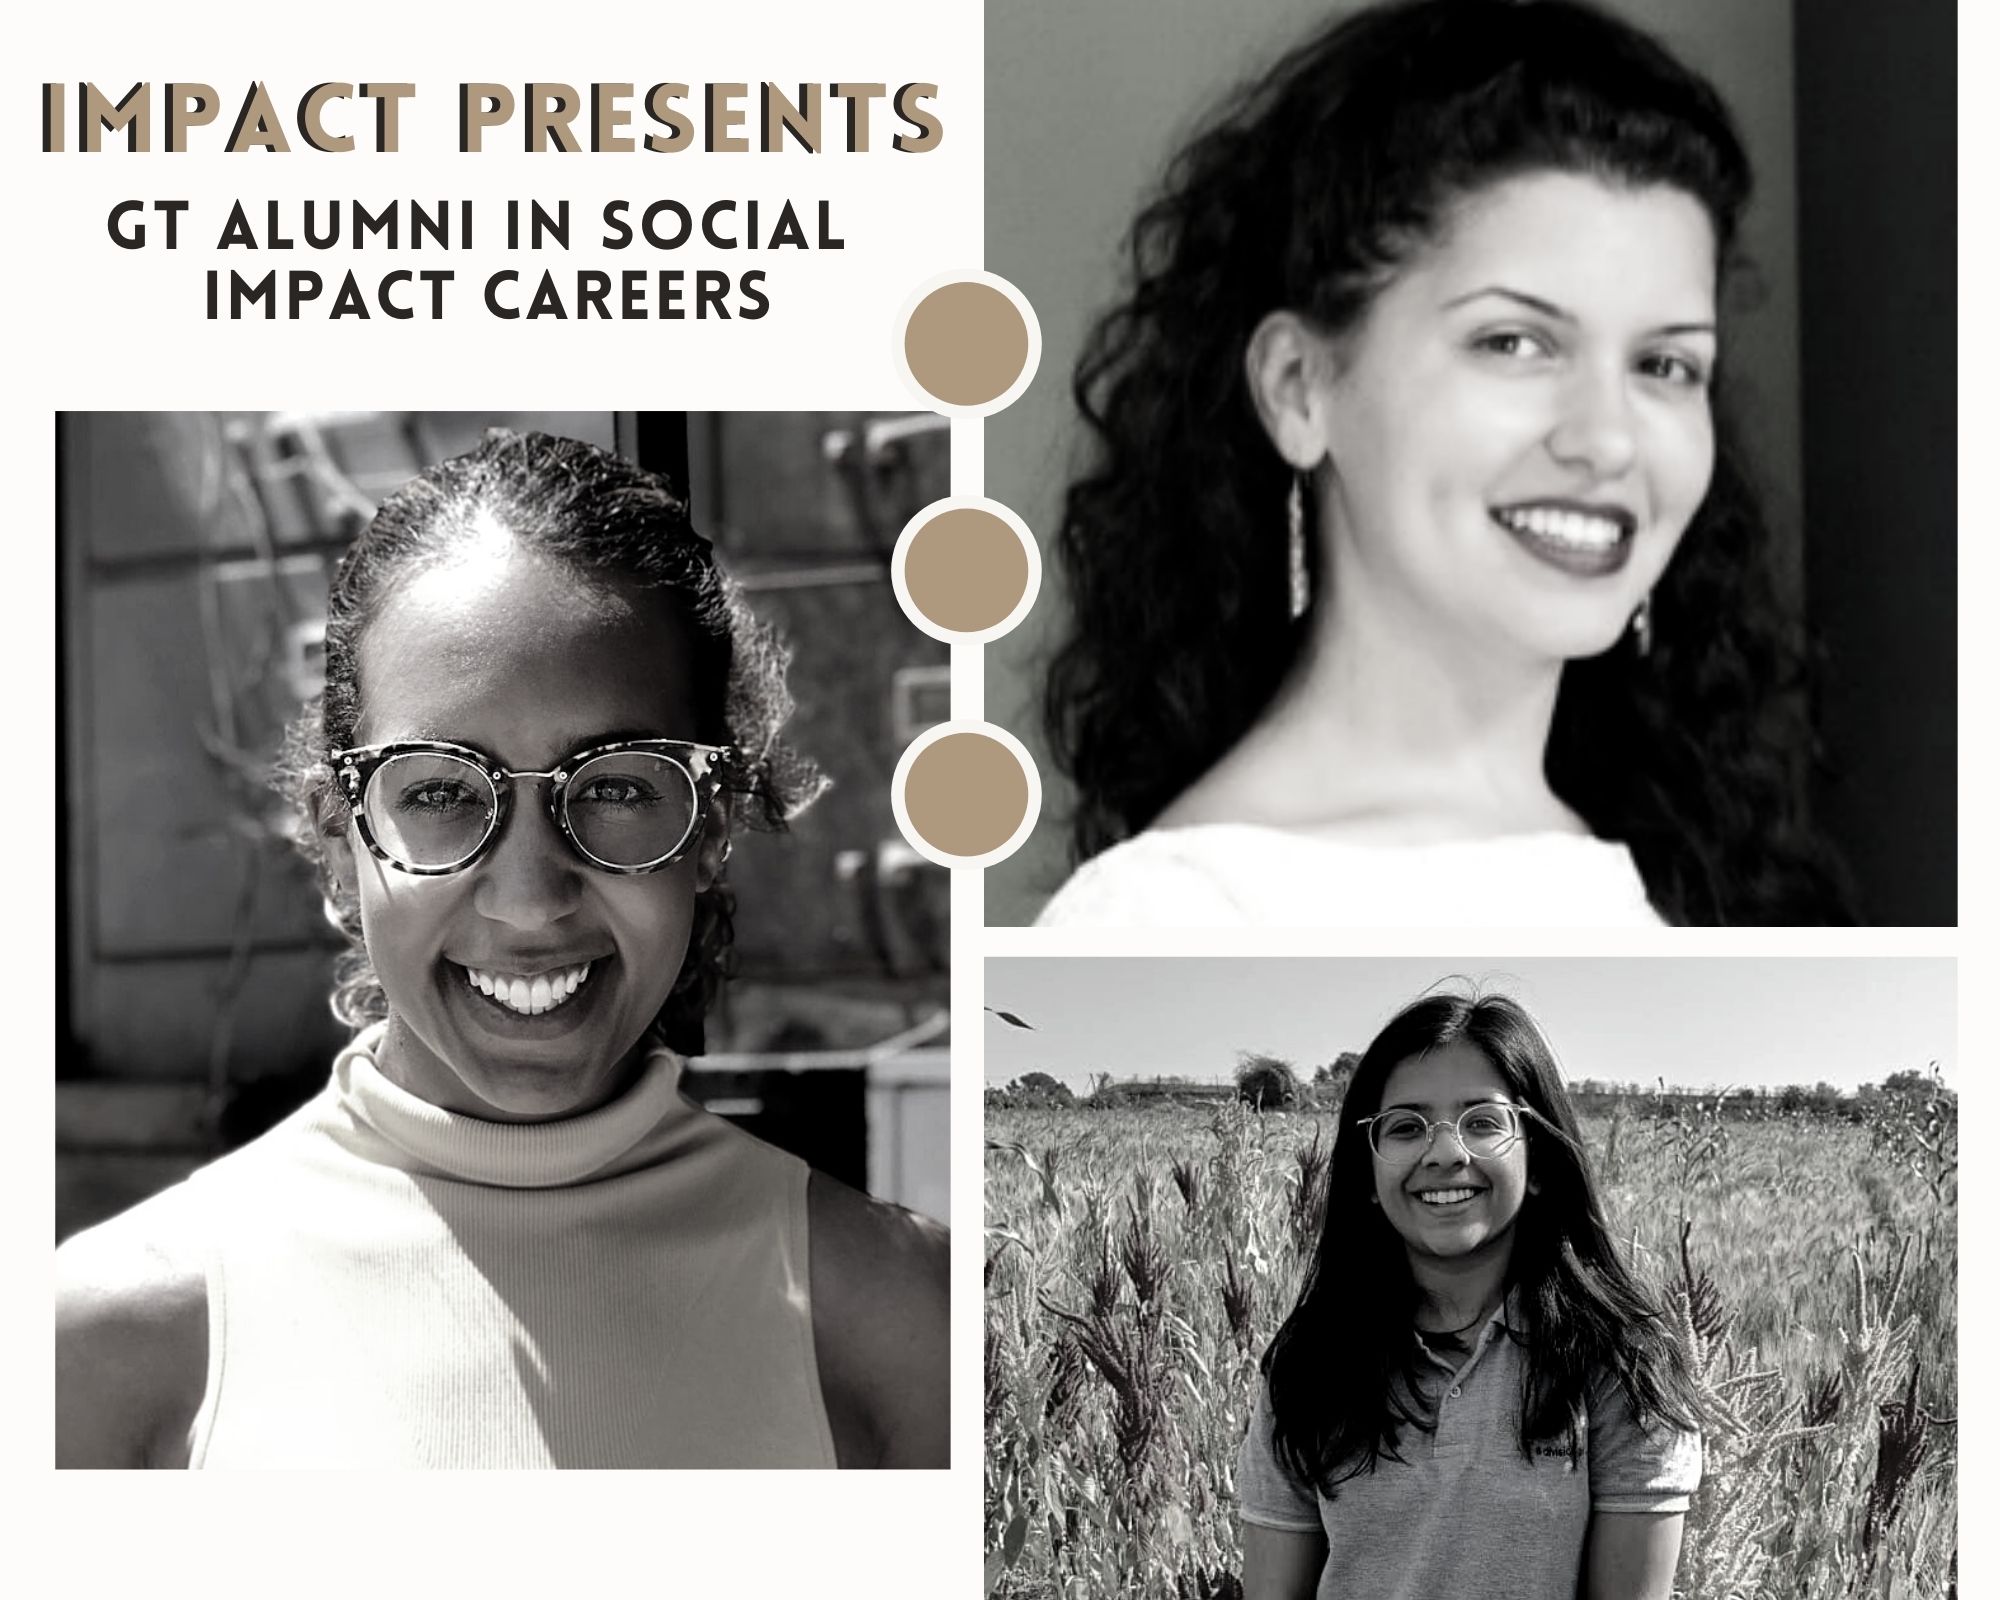 "Lead from a place of humility”- Advice from young alumni in social impact careers.